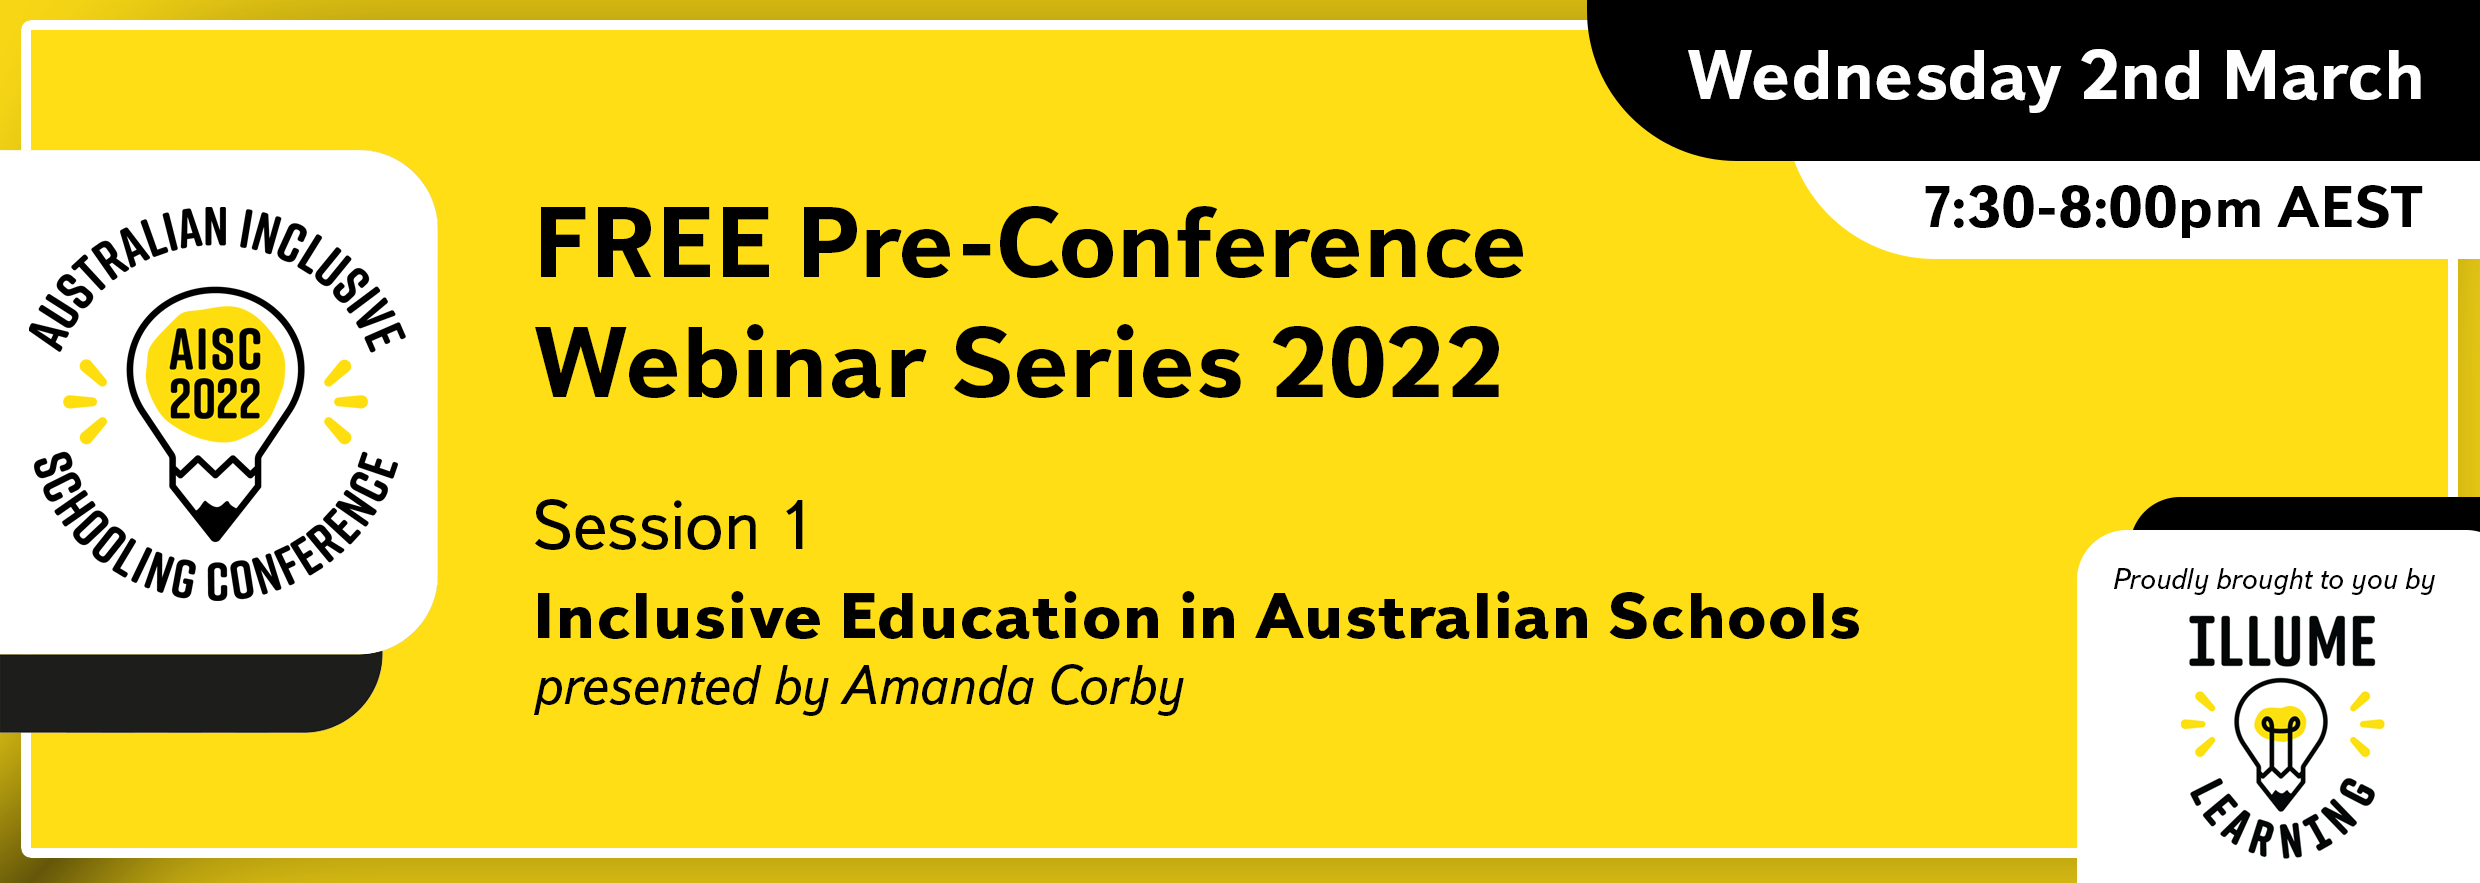 Image Description: Black text on a yellow background reads 'Australian Inclusive Schooling Conference, 'FREE Pre-conference Webinar Series 2022. Session 1. Inclusive Education in Australian Schools. presented by Amanda Corby. Wednesday 2nd March 7:30-8:00pm AEST. Proudly brought to you by Illume Learning'